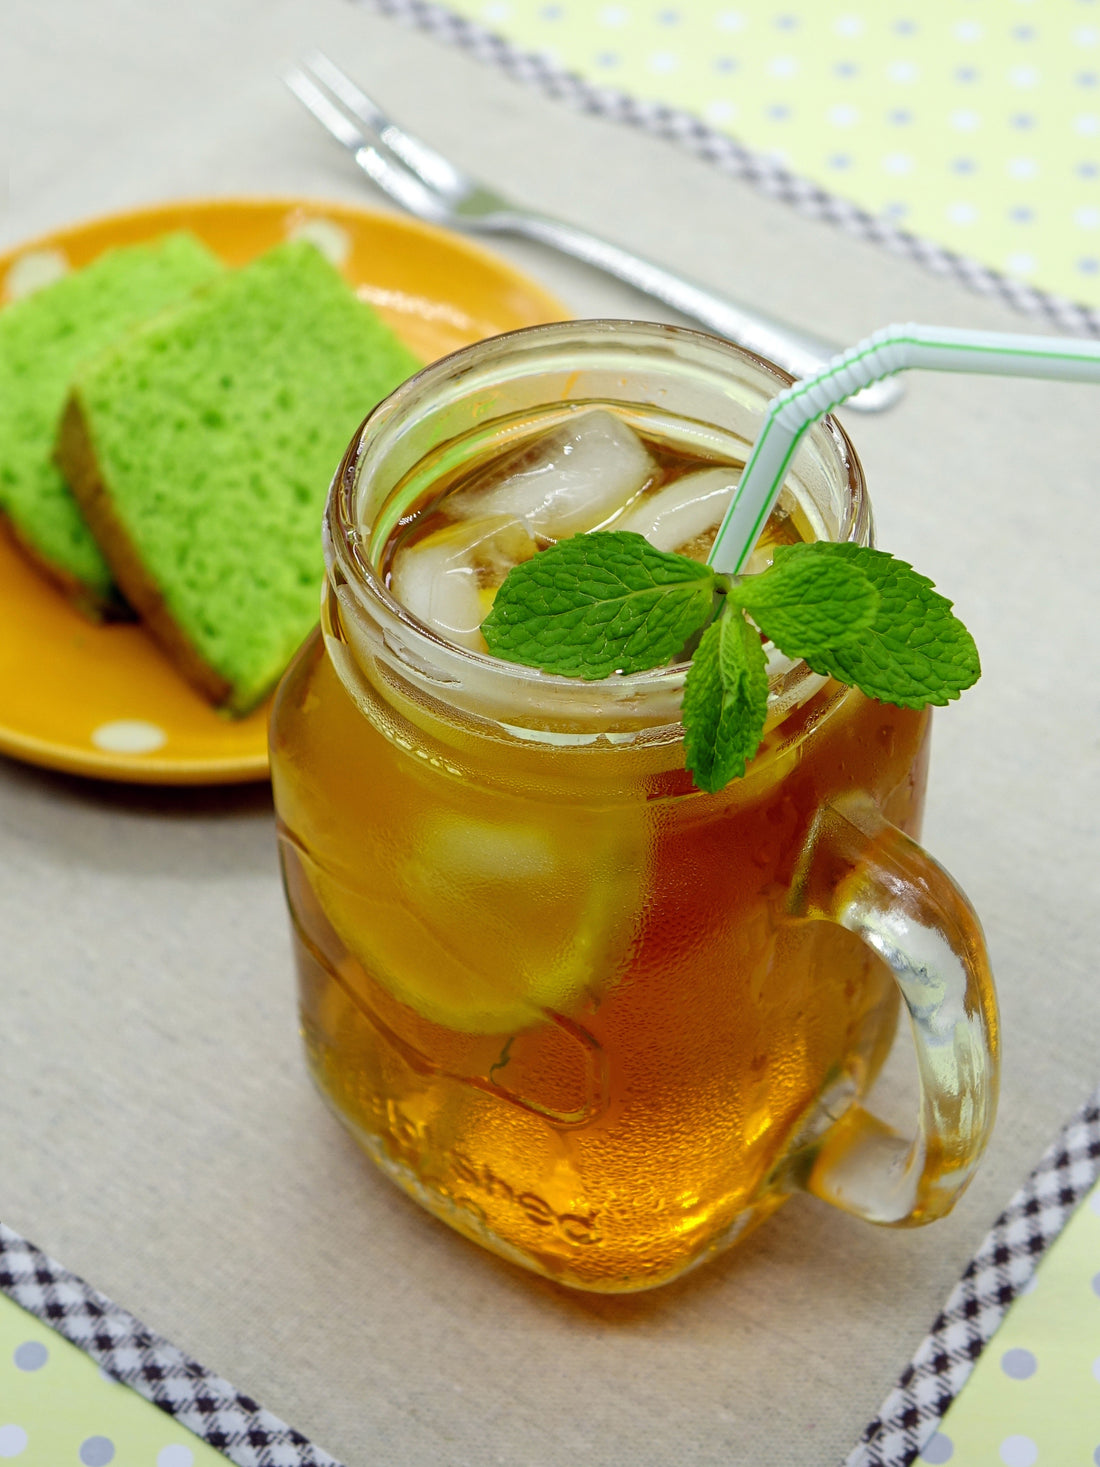 How to make Ice Tea at home ?